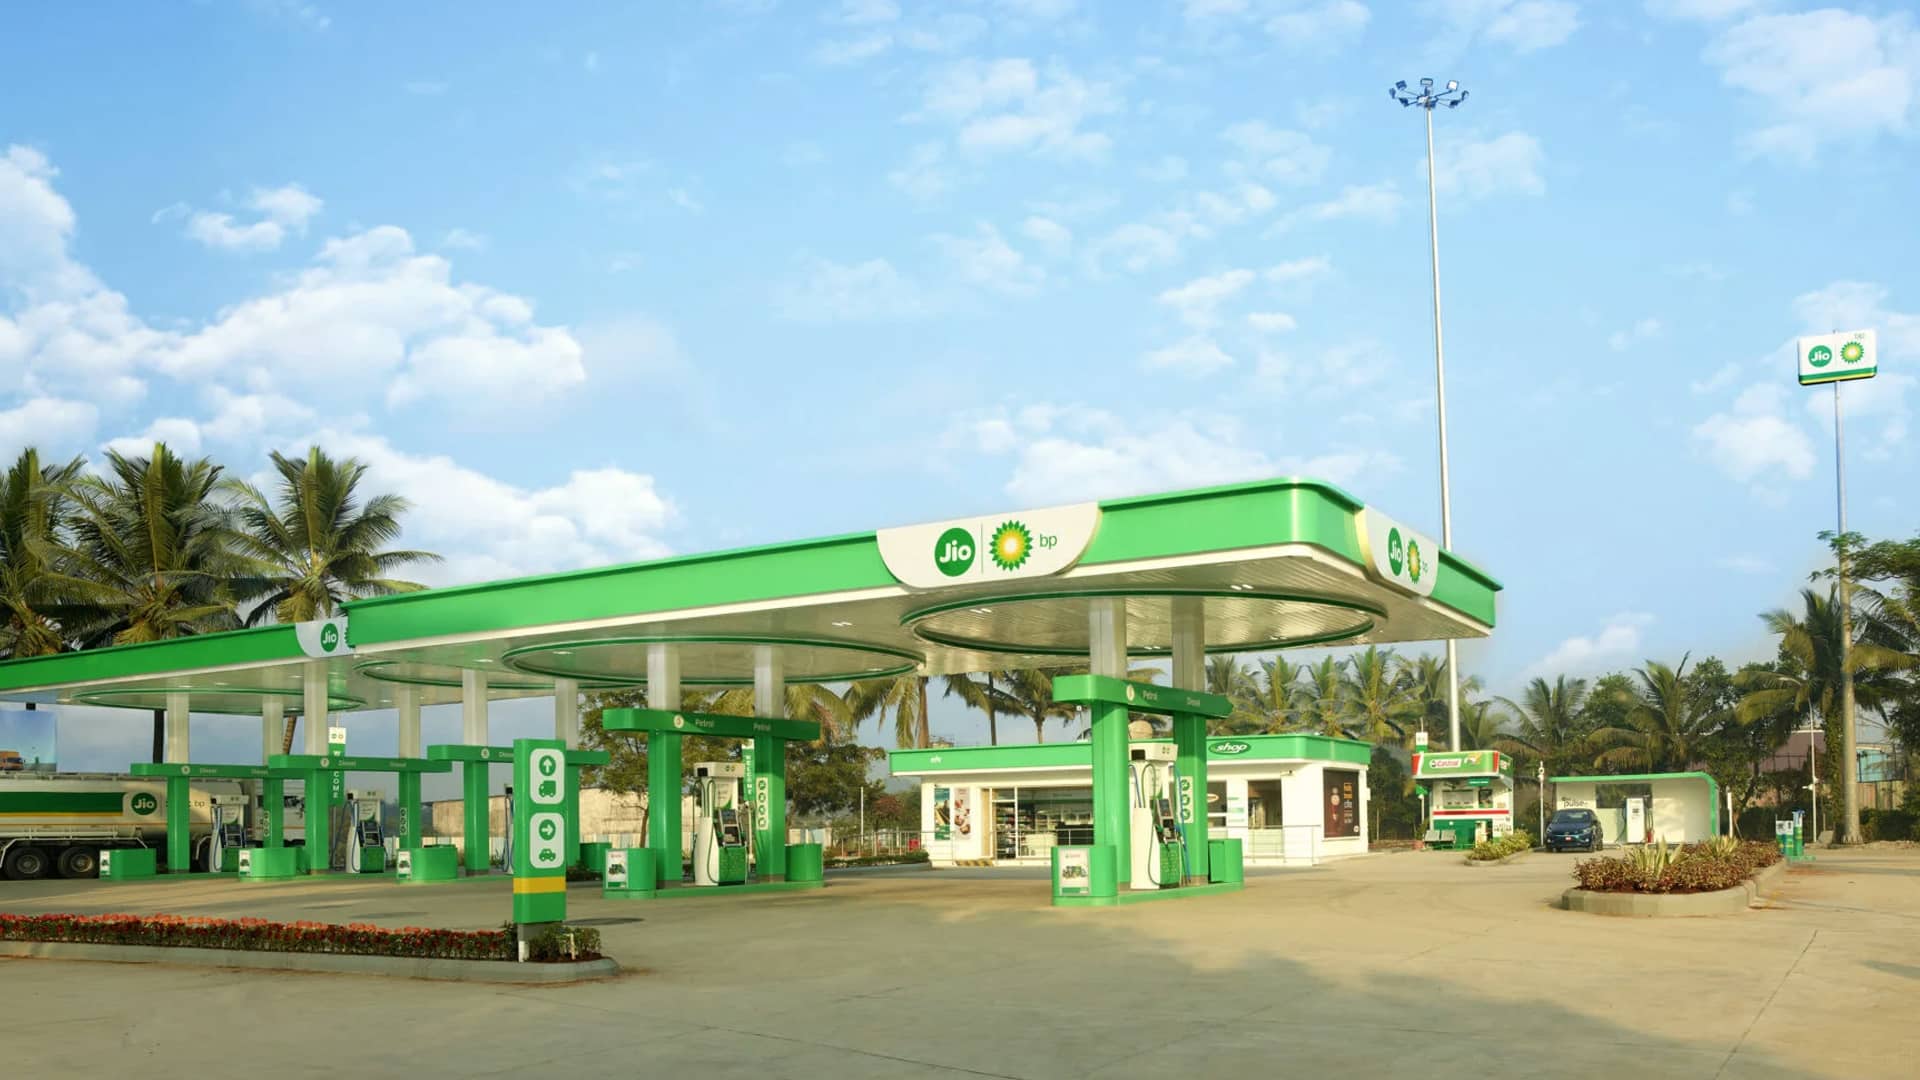 Jio-bp rolls out E20 petrol with 20 pc ethanol